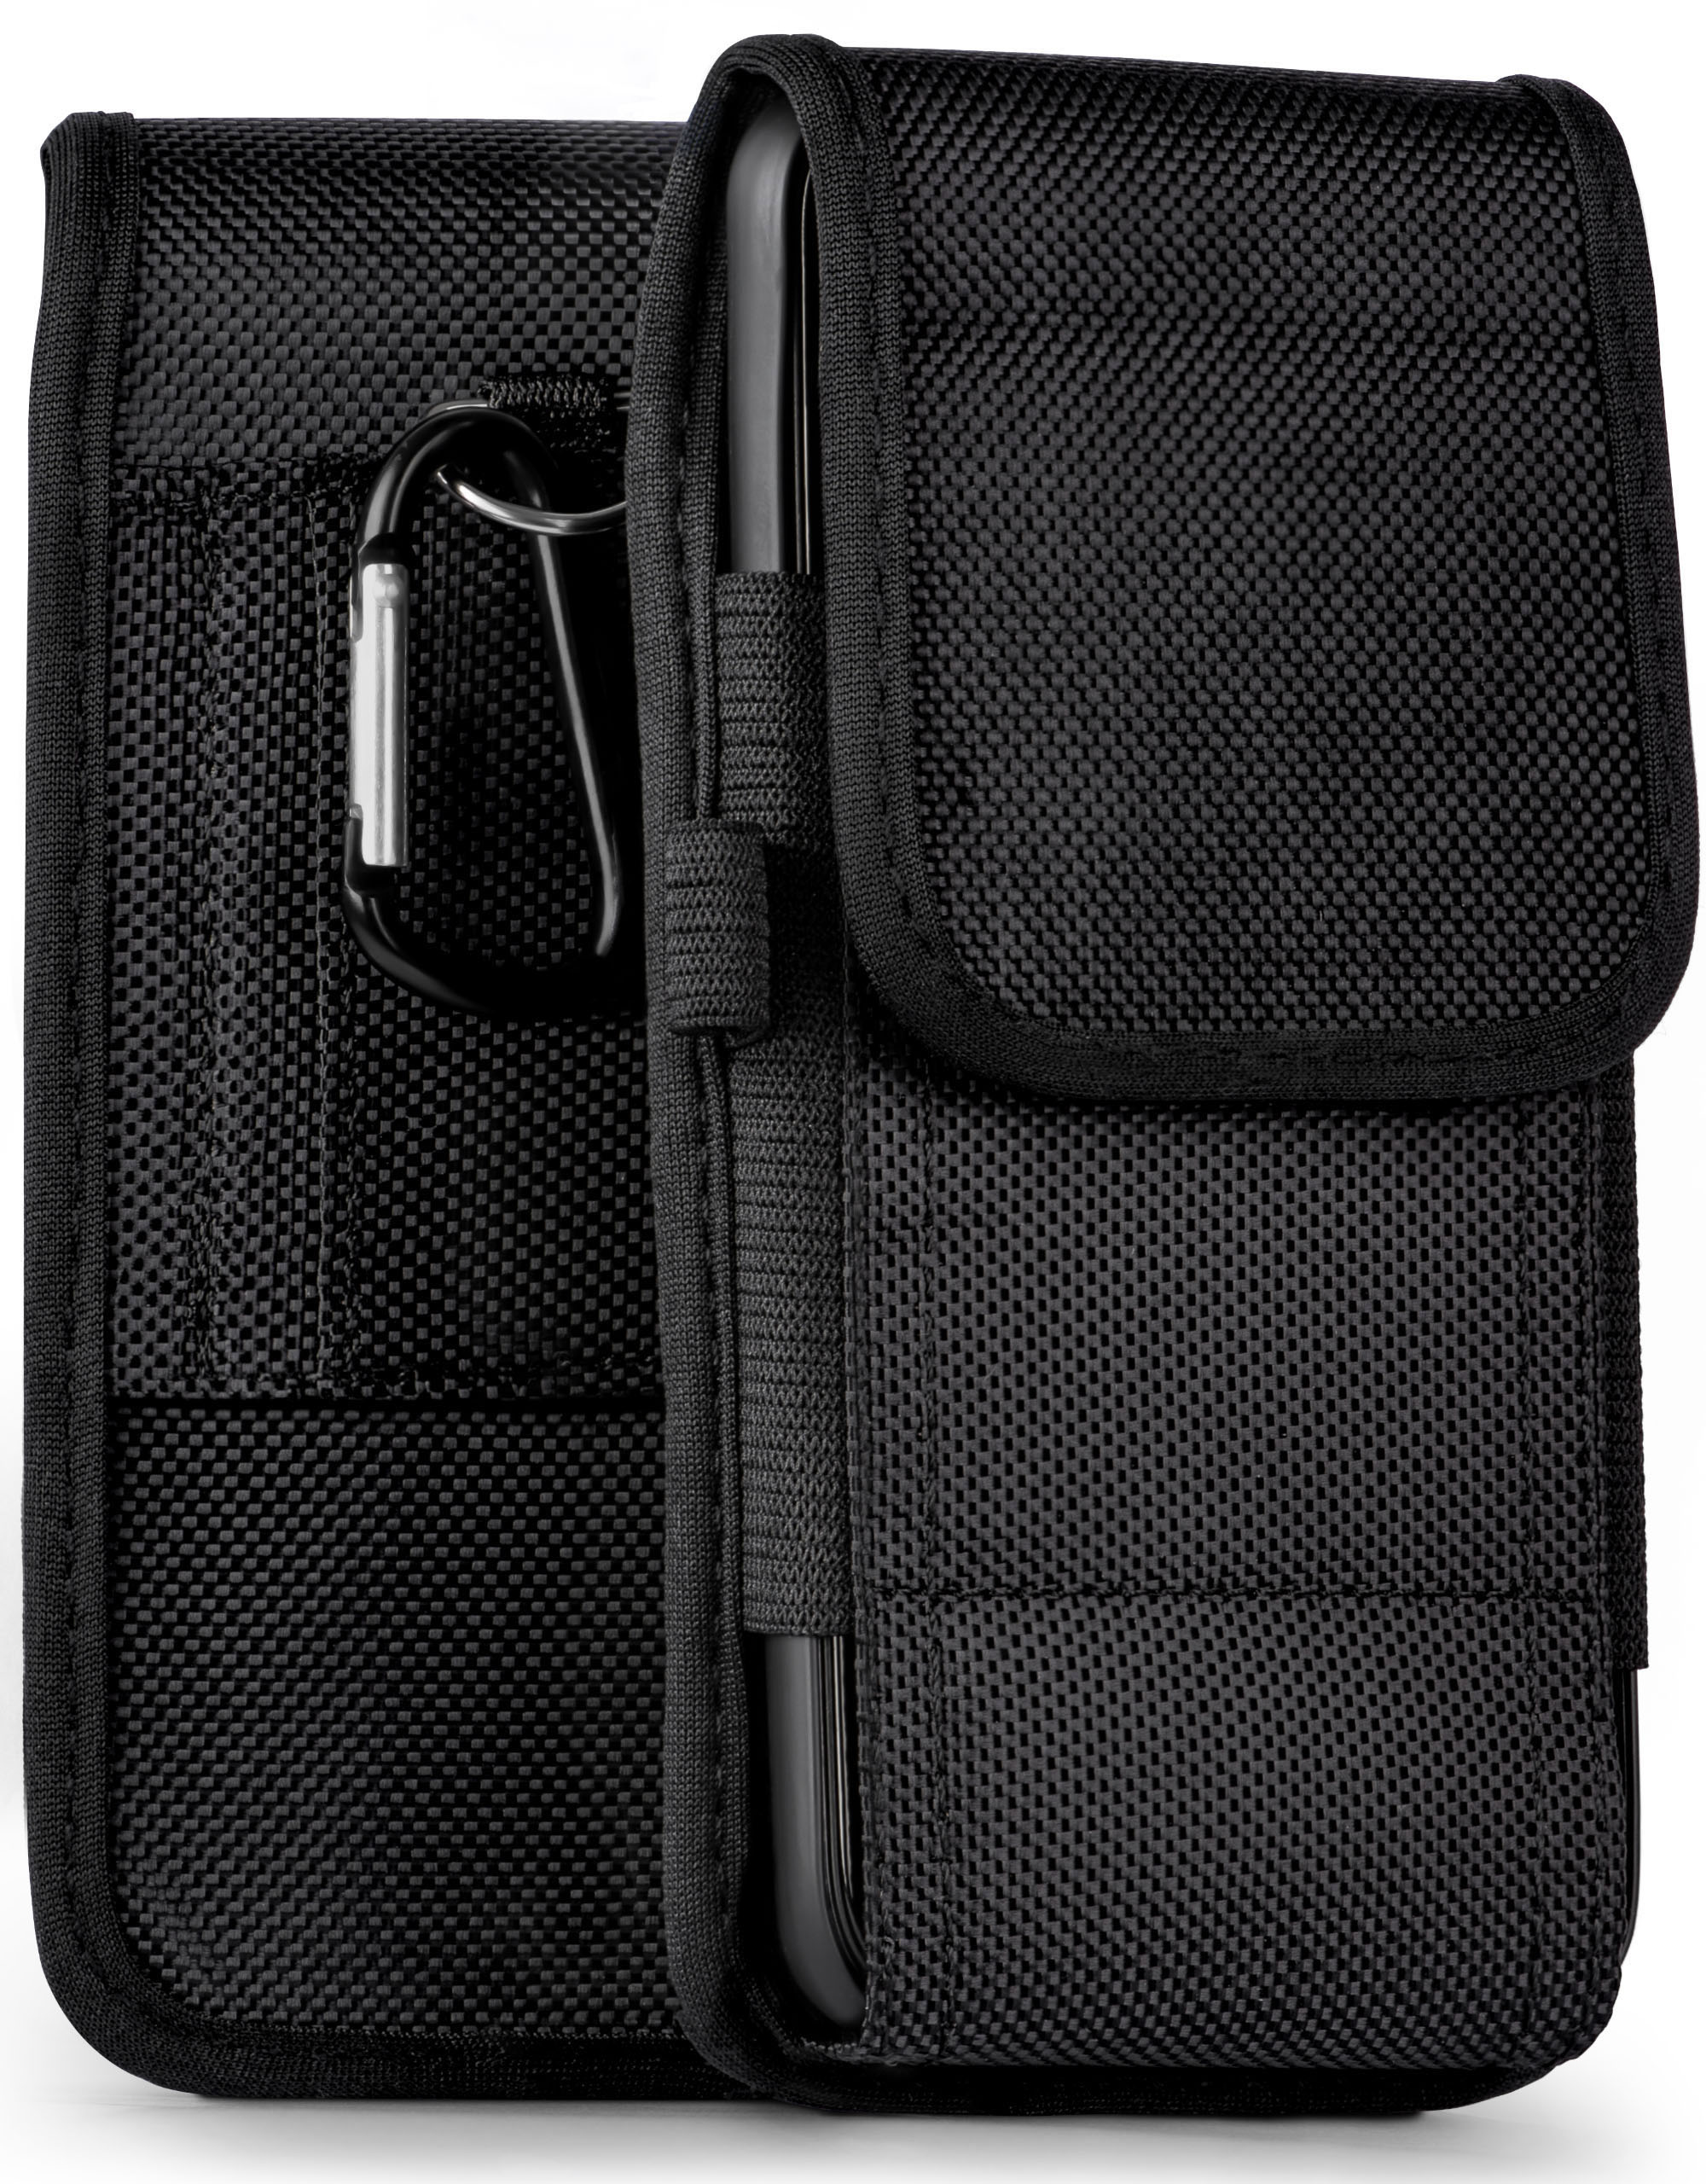 MOEX Agility Case, Holster, Pixel 3, Google, Trail